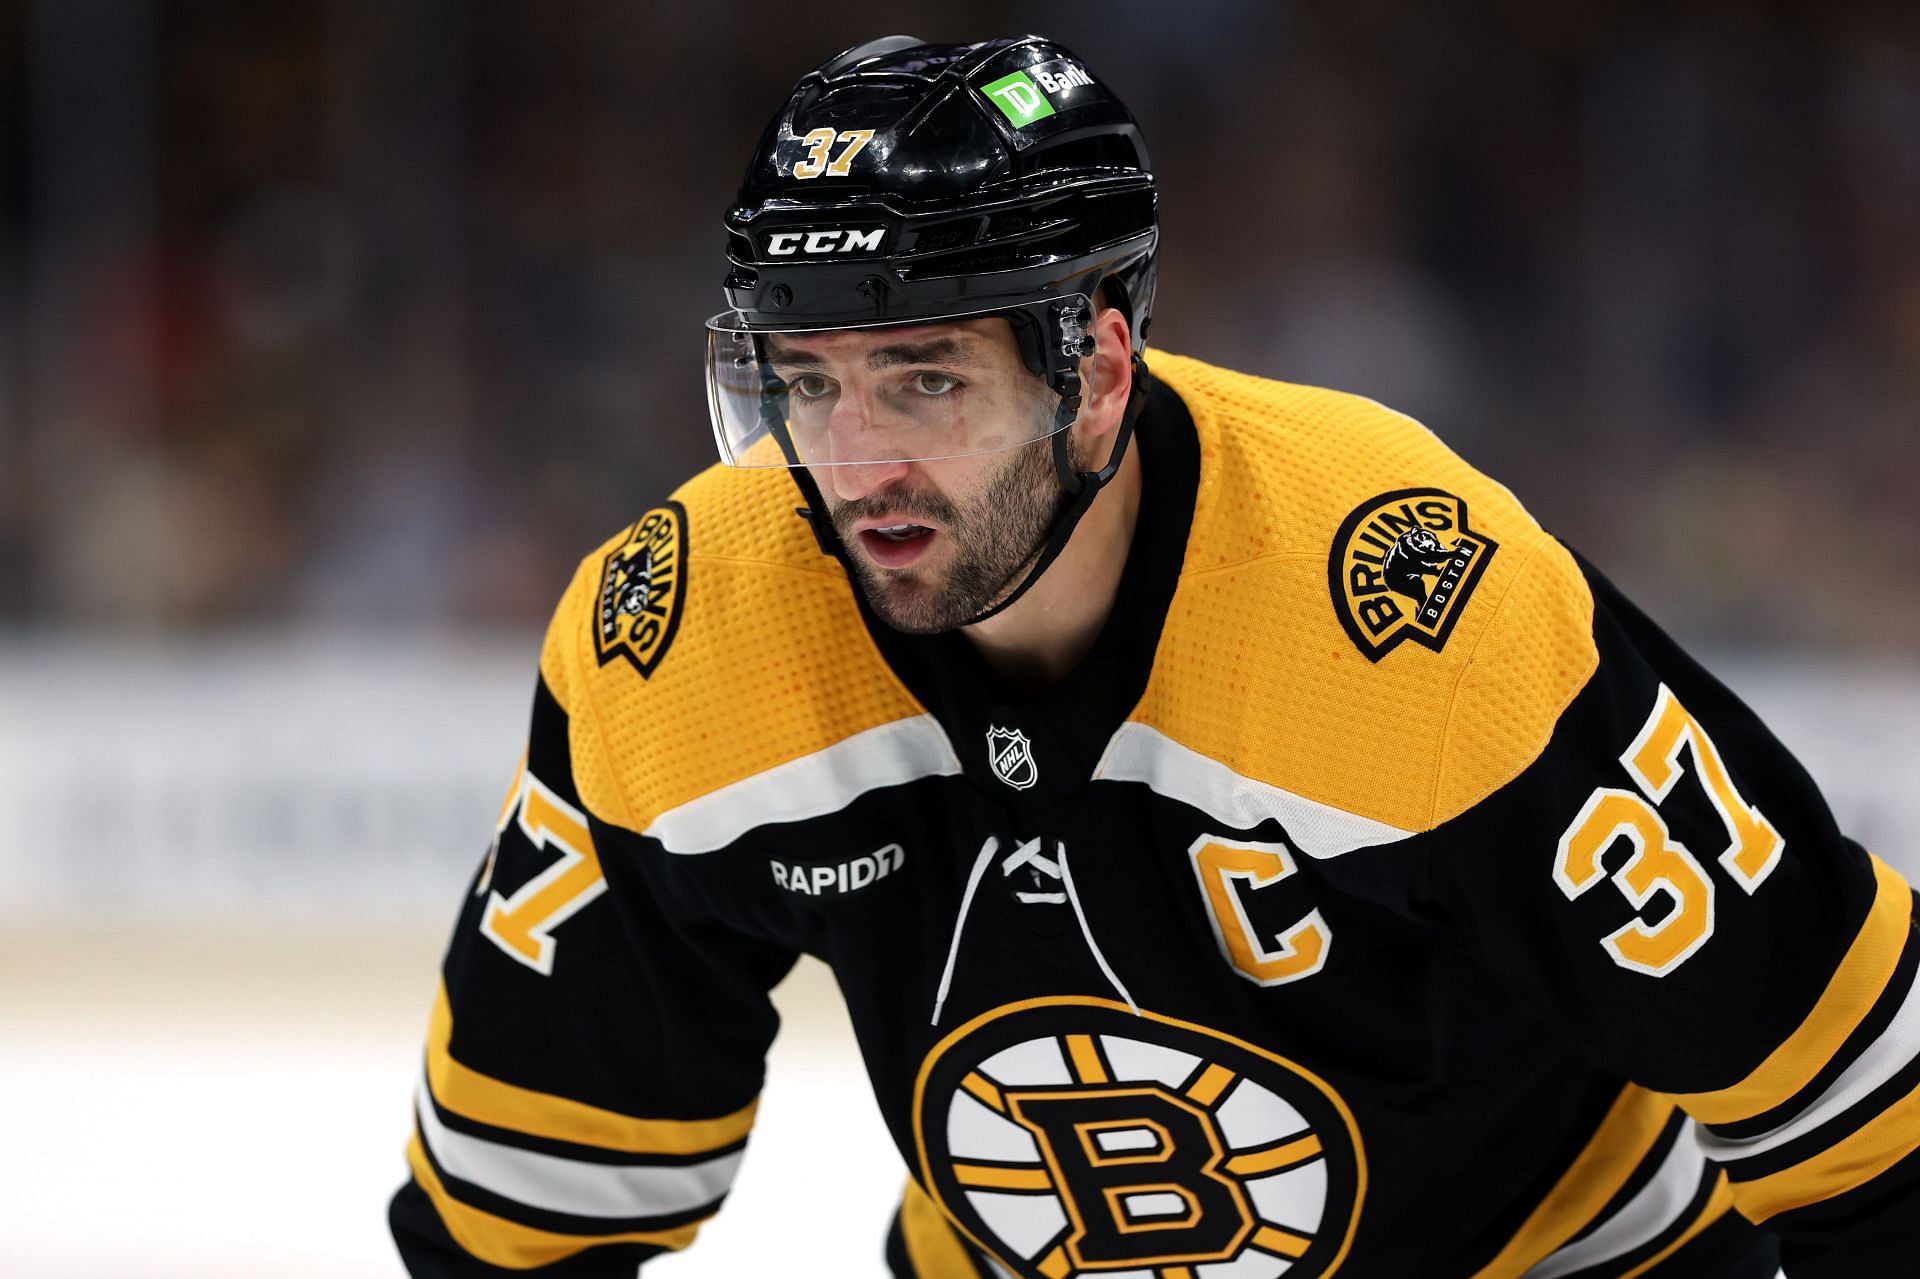 WATCH Emotional Patrice Bergeron hugs every player on Boston Bruins squad after possibly his last NHL game